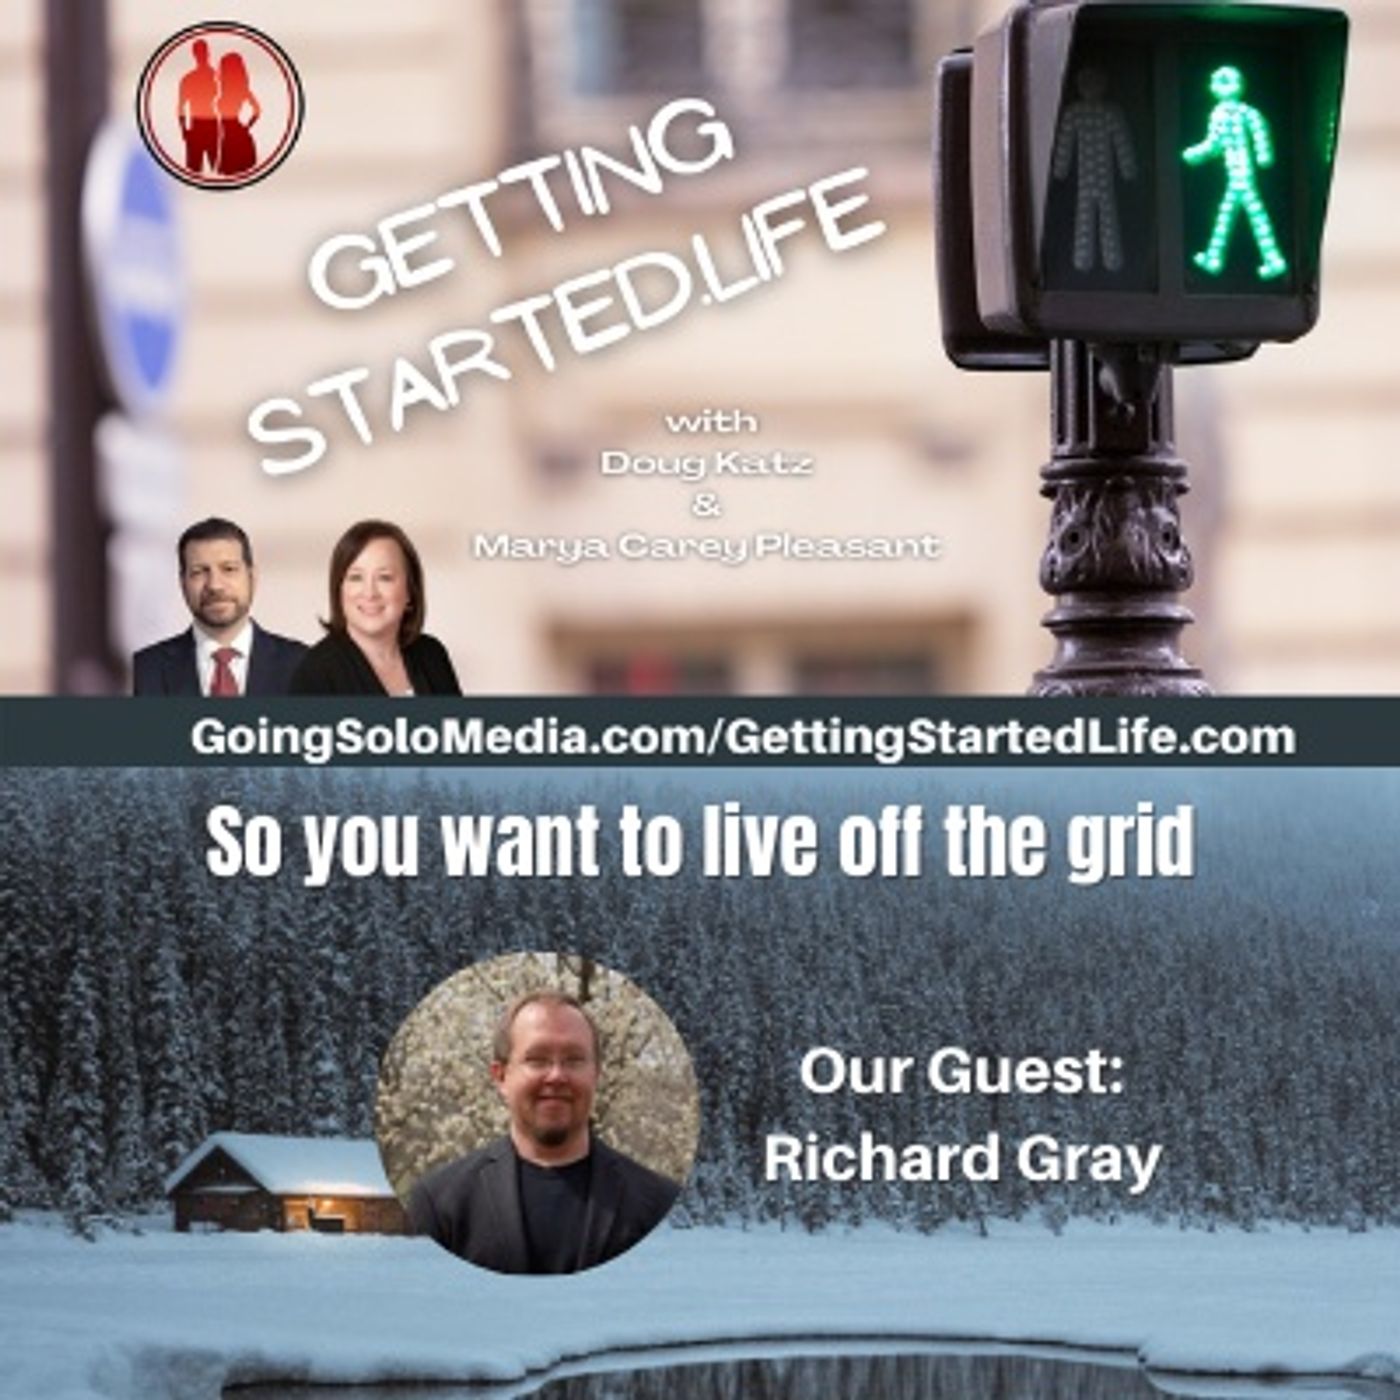 So You Want To Live Off The Grid